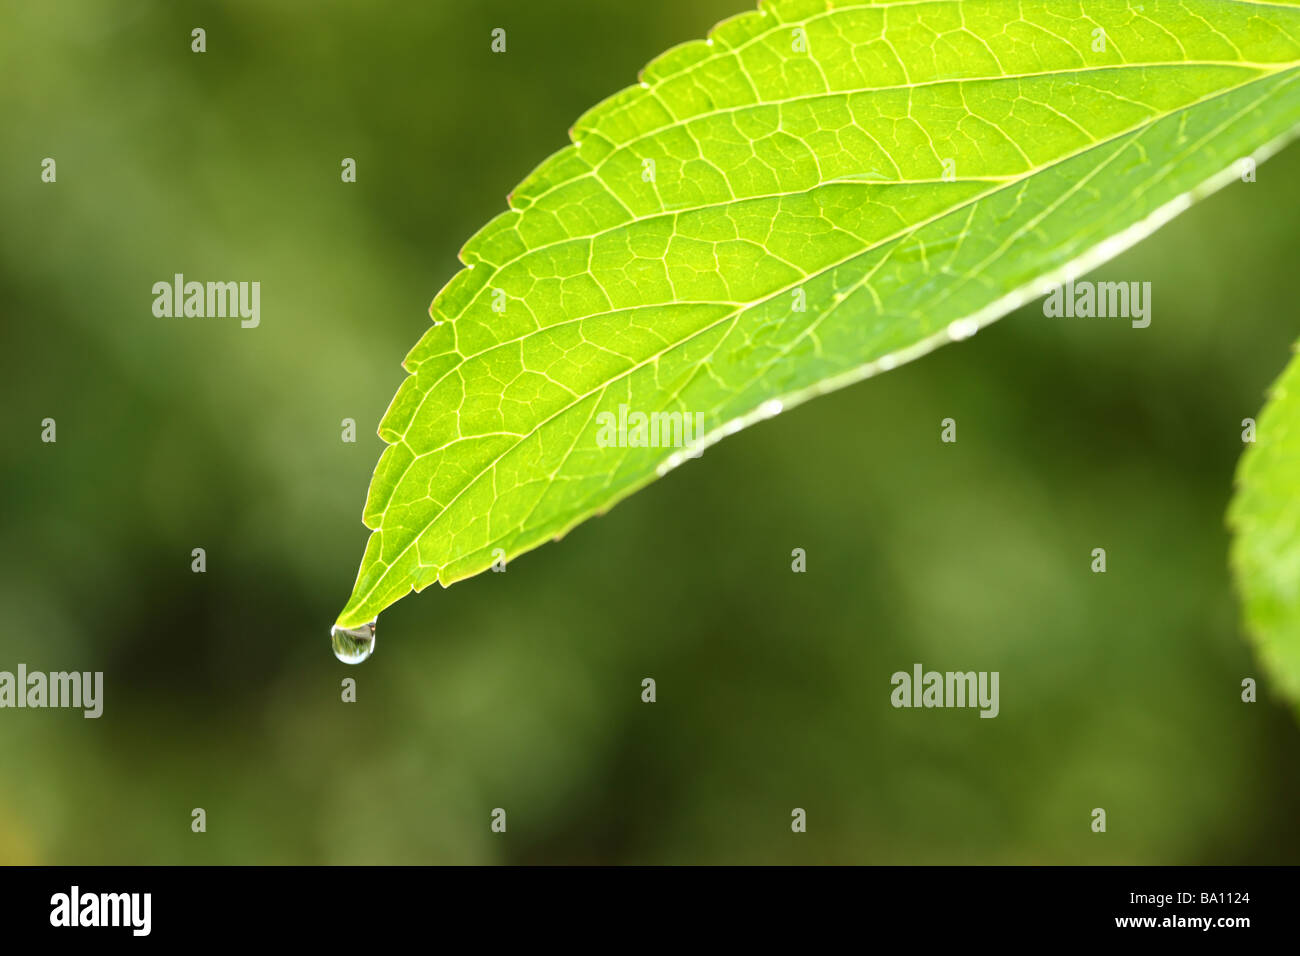 Drip of water on green leaf Stock Photo